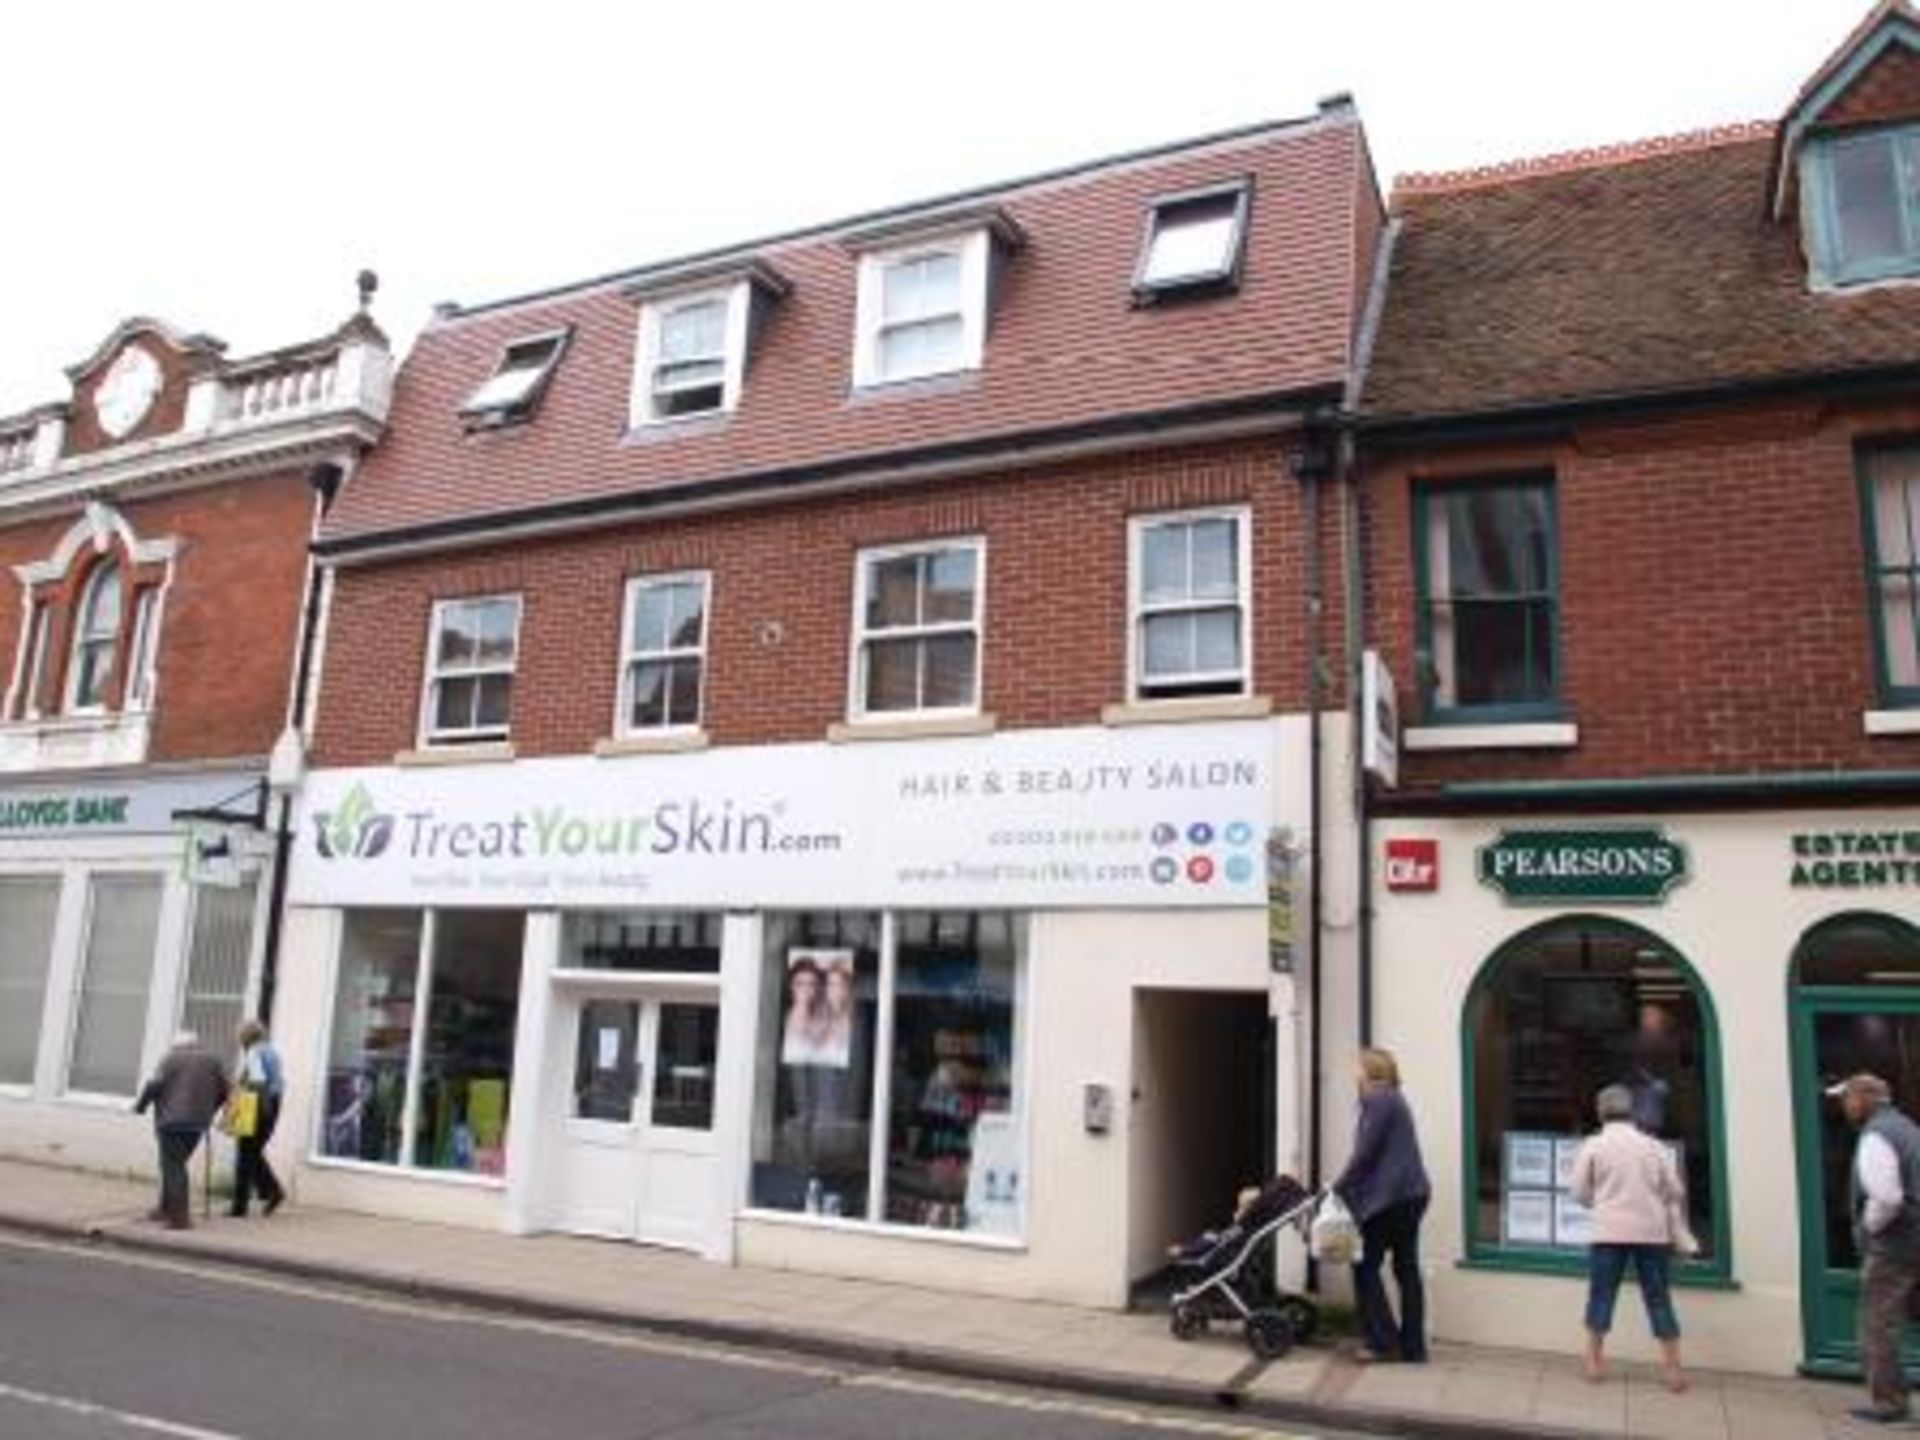 5 North Street, Havant, Hampshire, PO9 1PW Havant & Waterlooville Areas FREEHOLD COMMERCIAL & GROUND